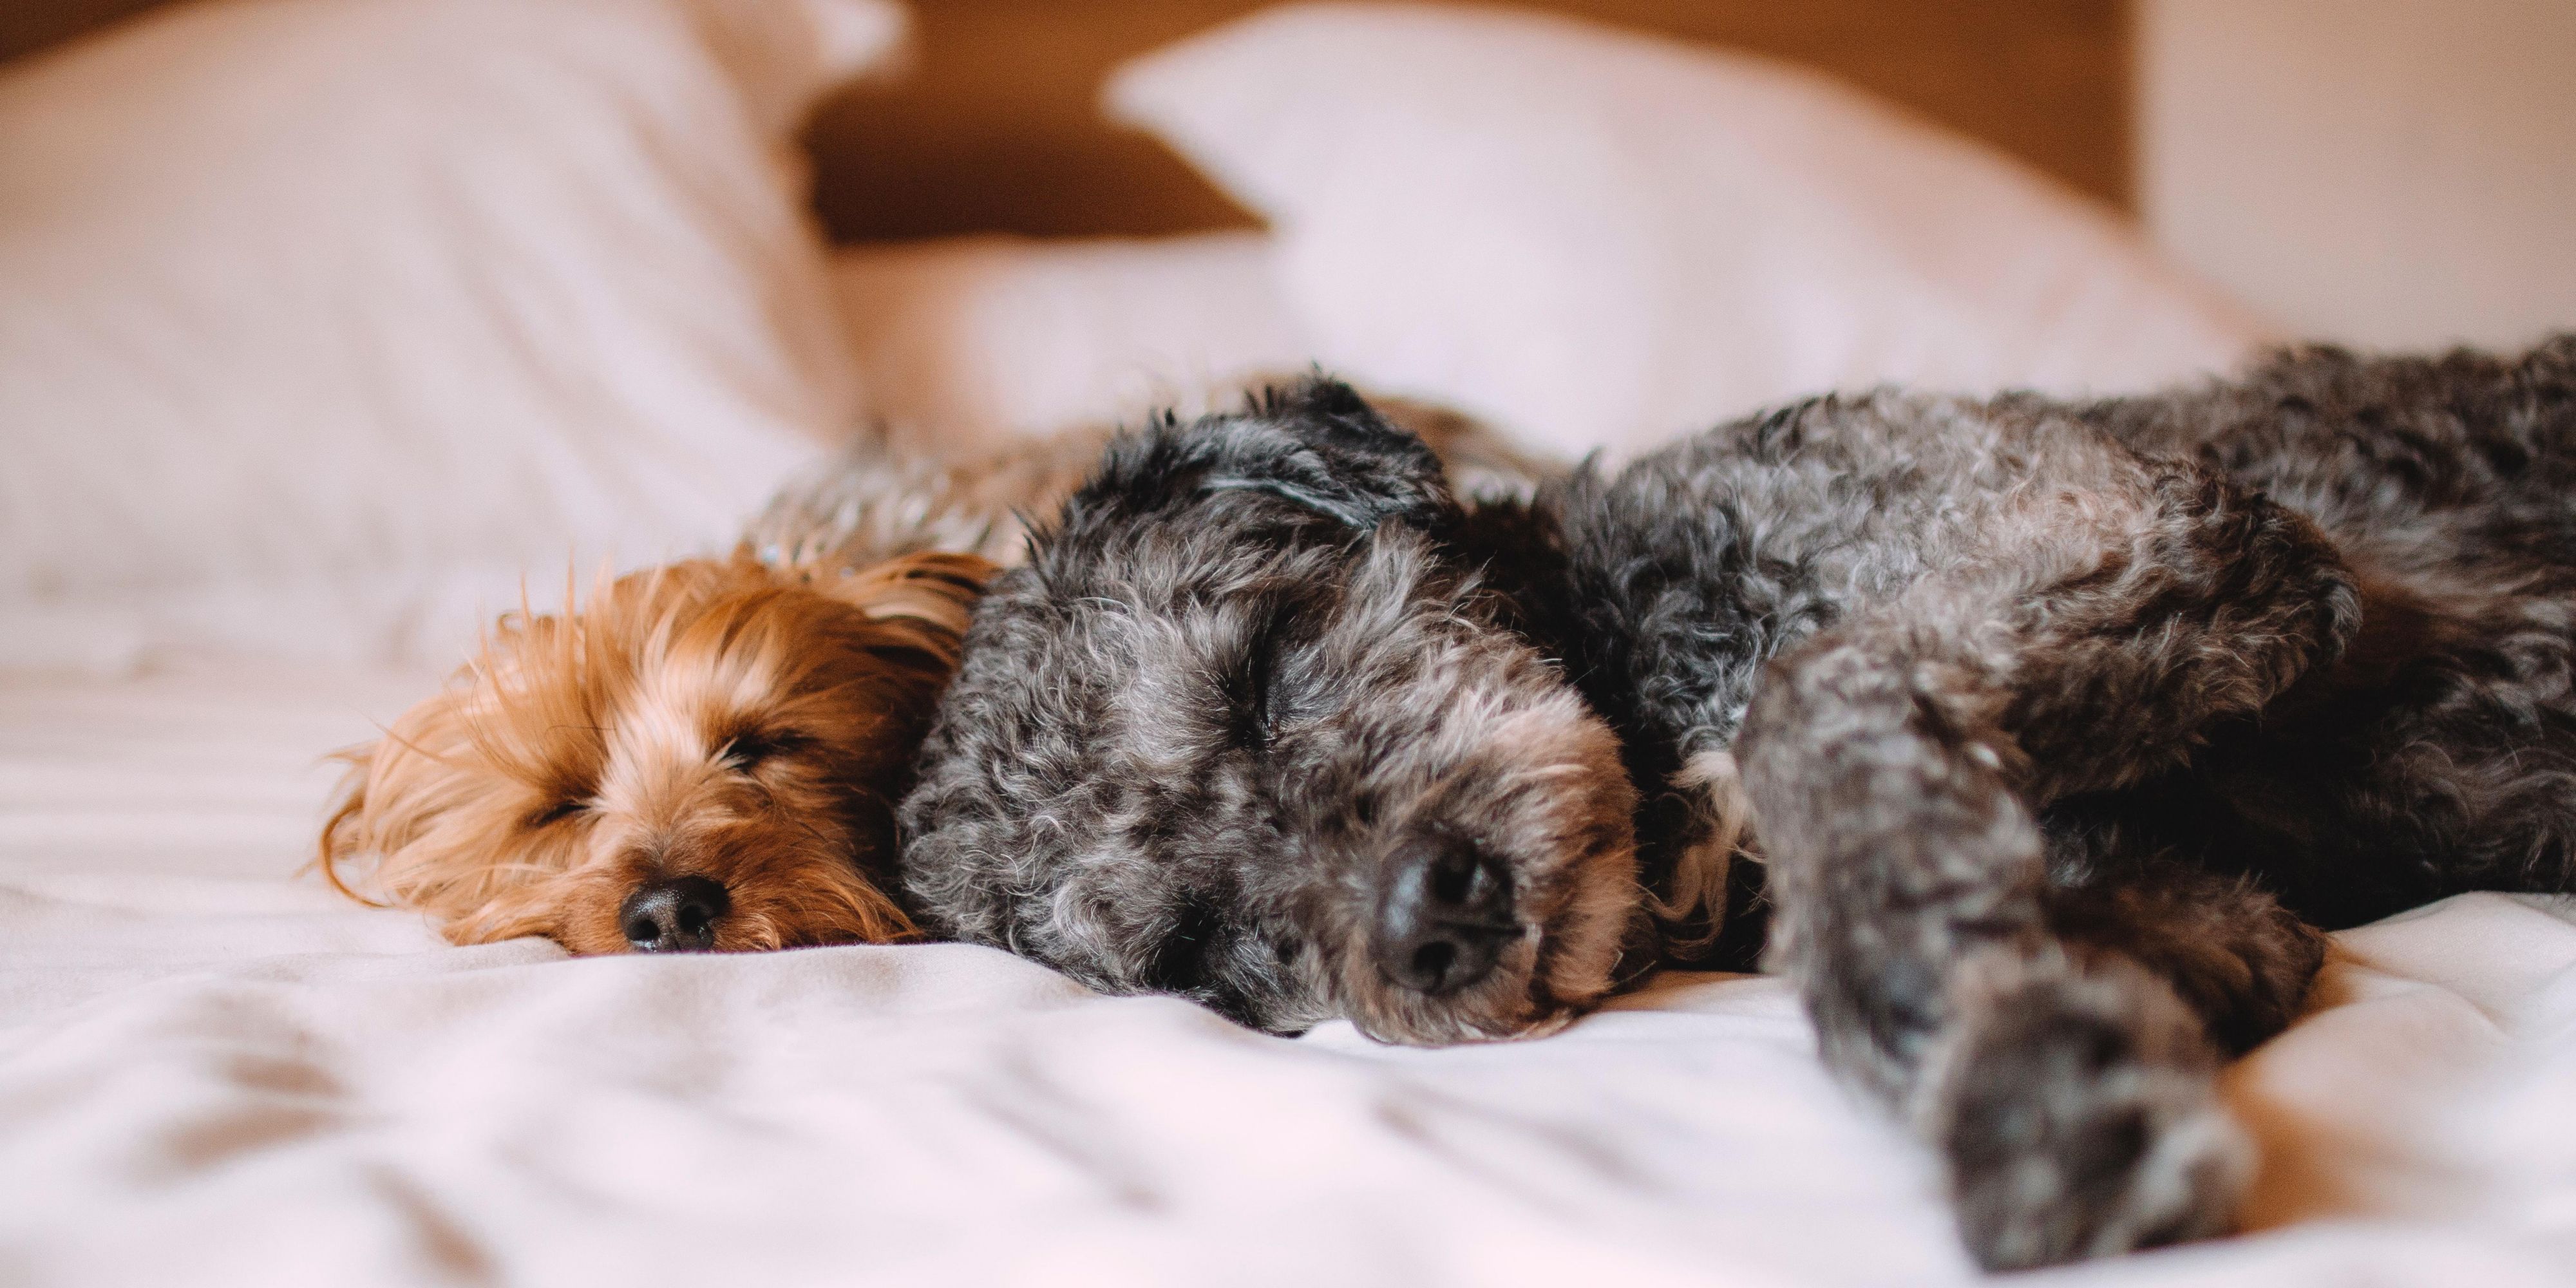 Pets are family too! We are now a pet friendly hotel. Call us today to book you pet friendly room.